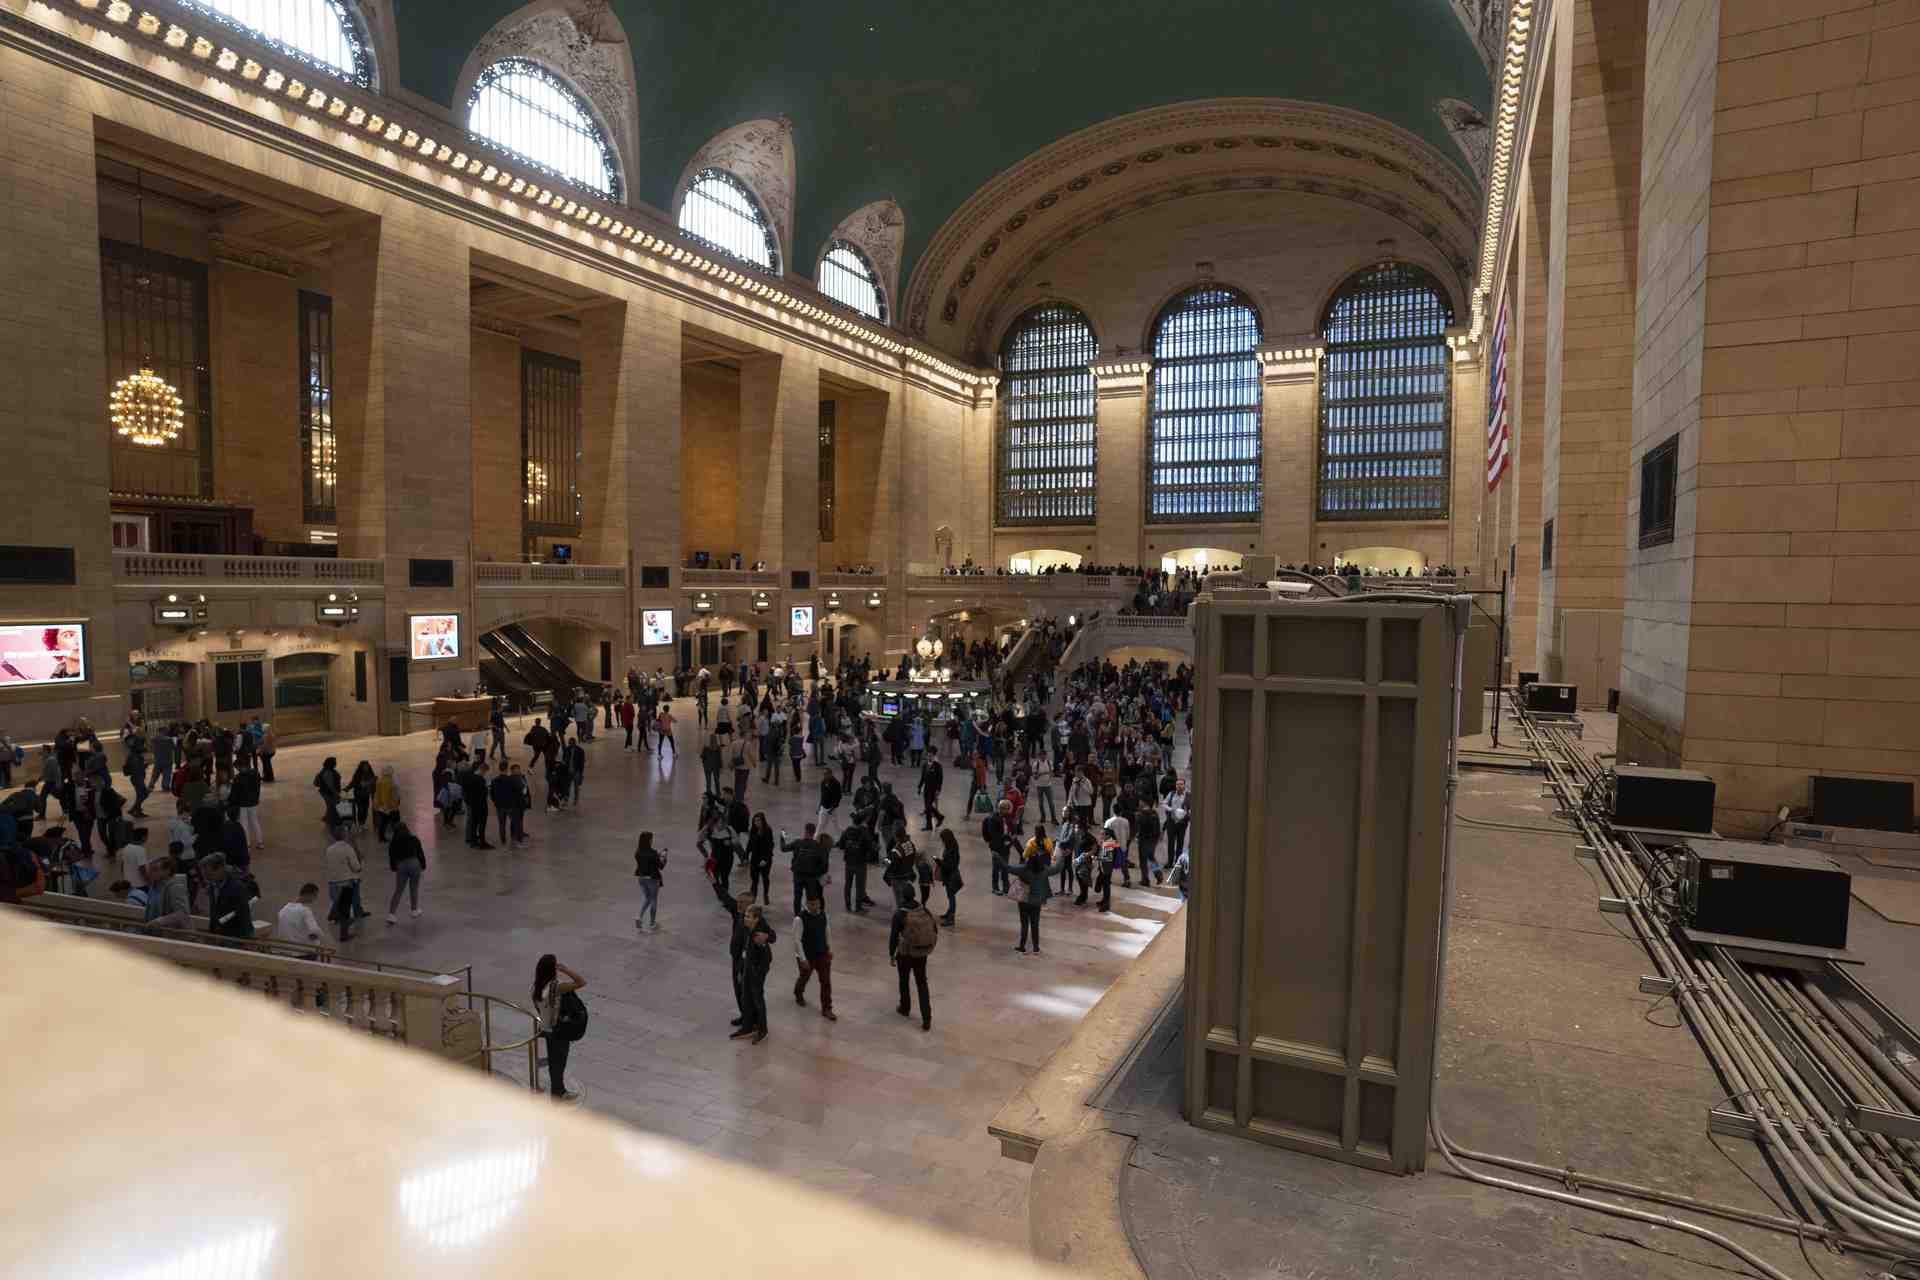 interior photograph of Grand Central Station's grand hall